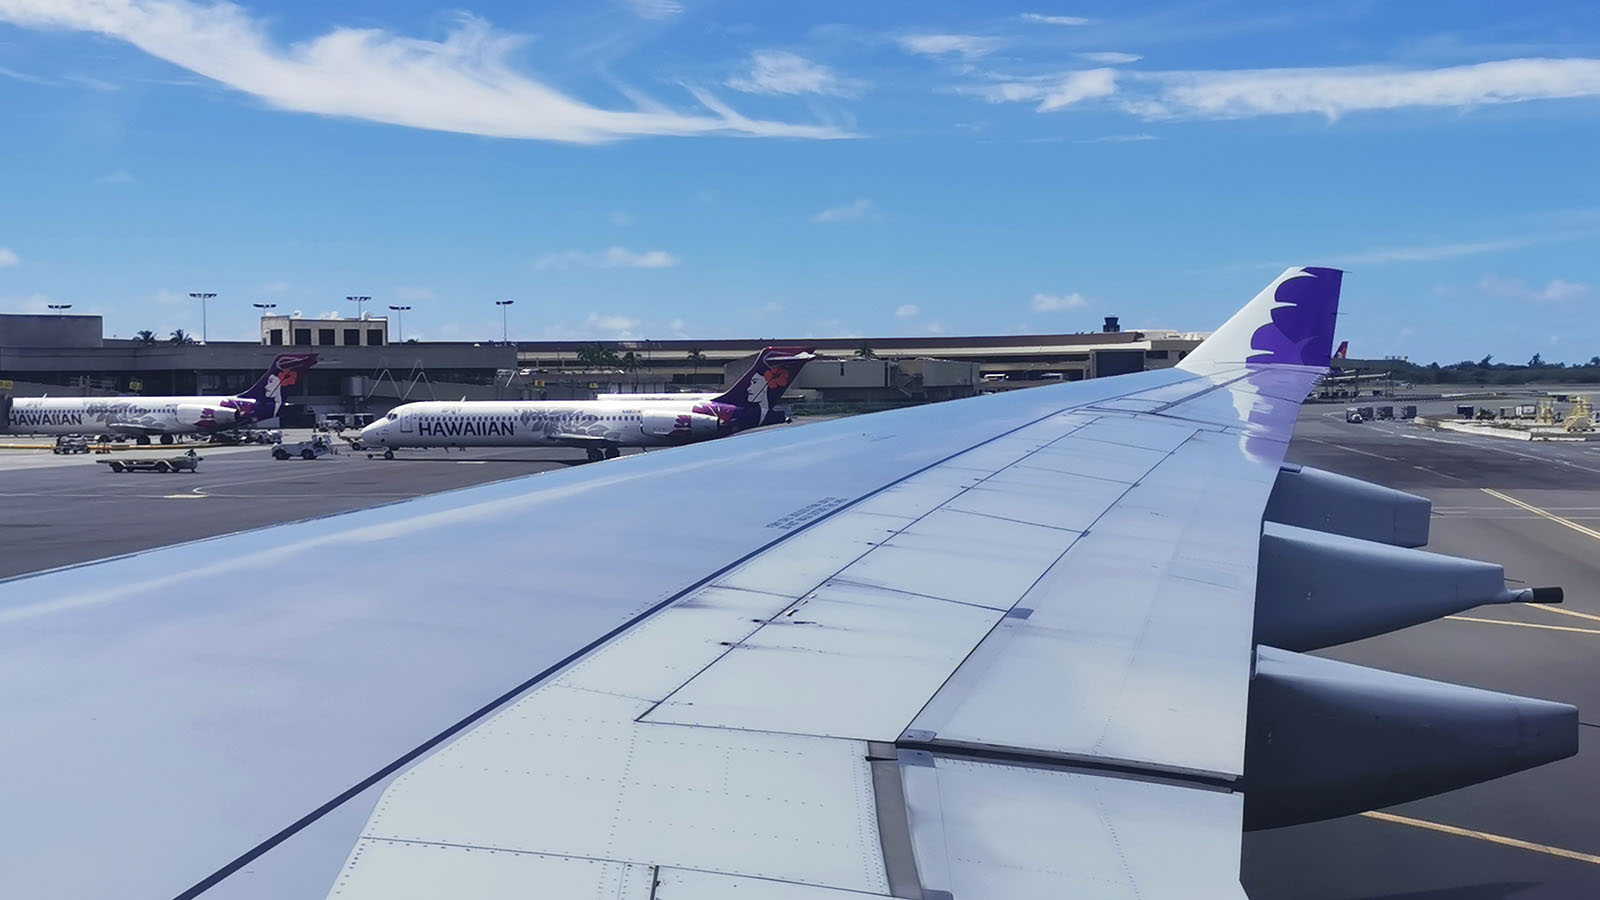 Looking over the wing on Hawaiian Airlines flight